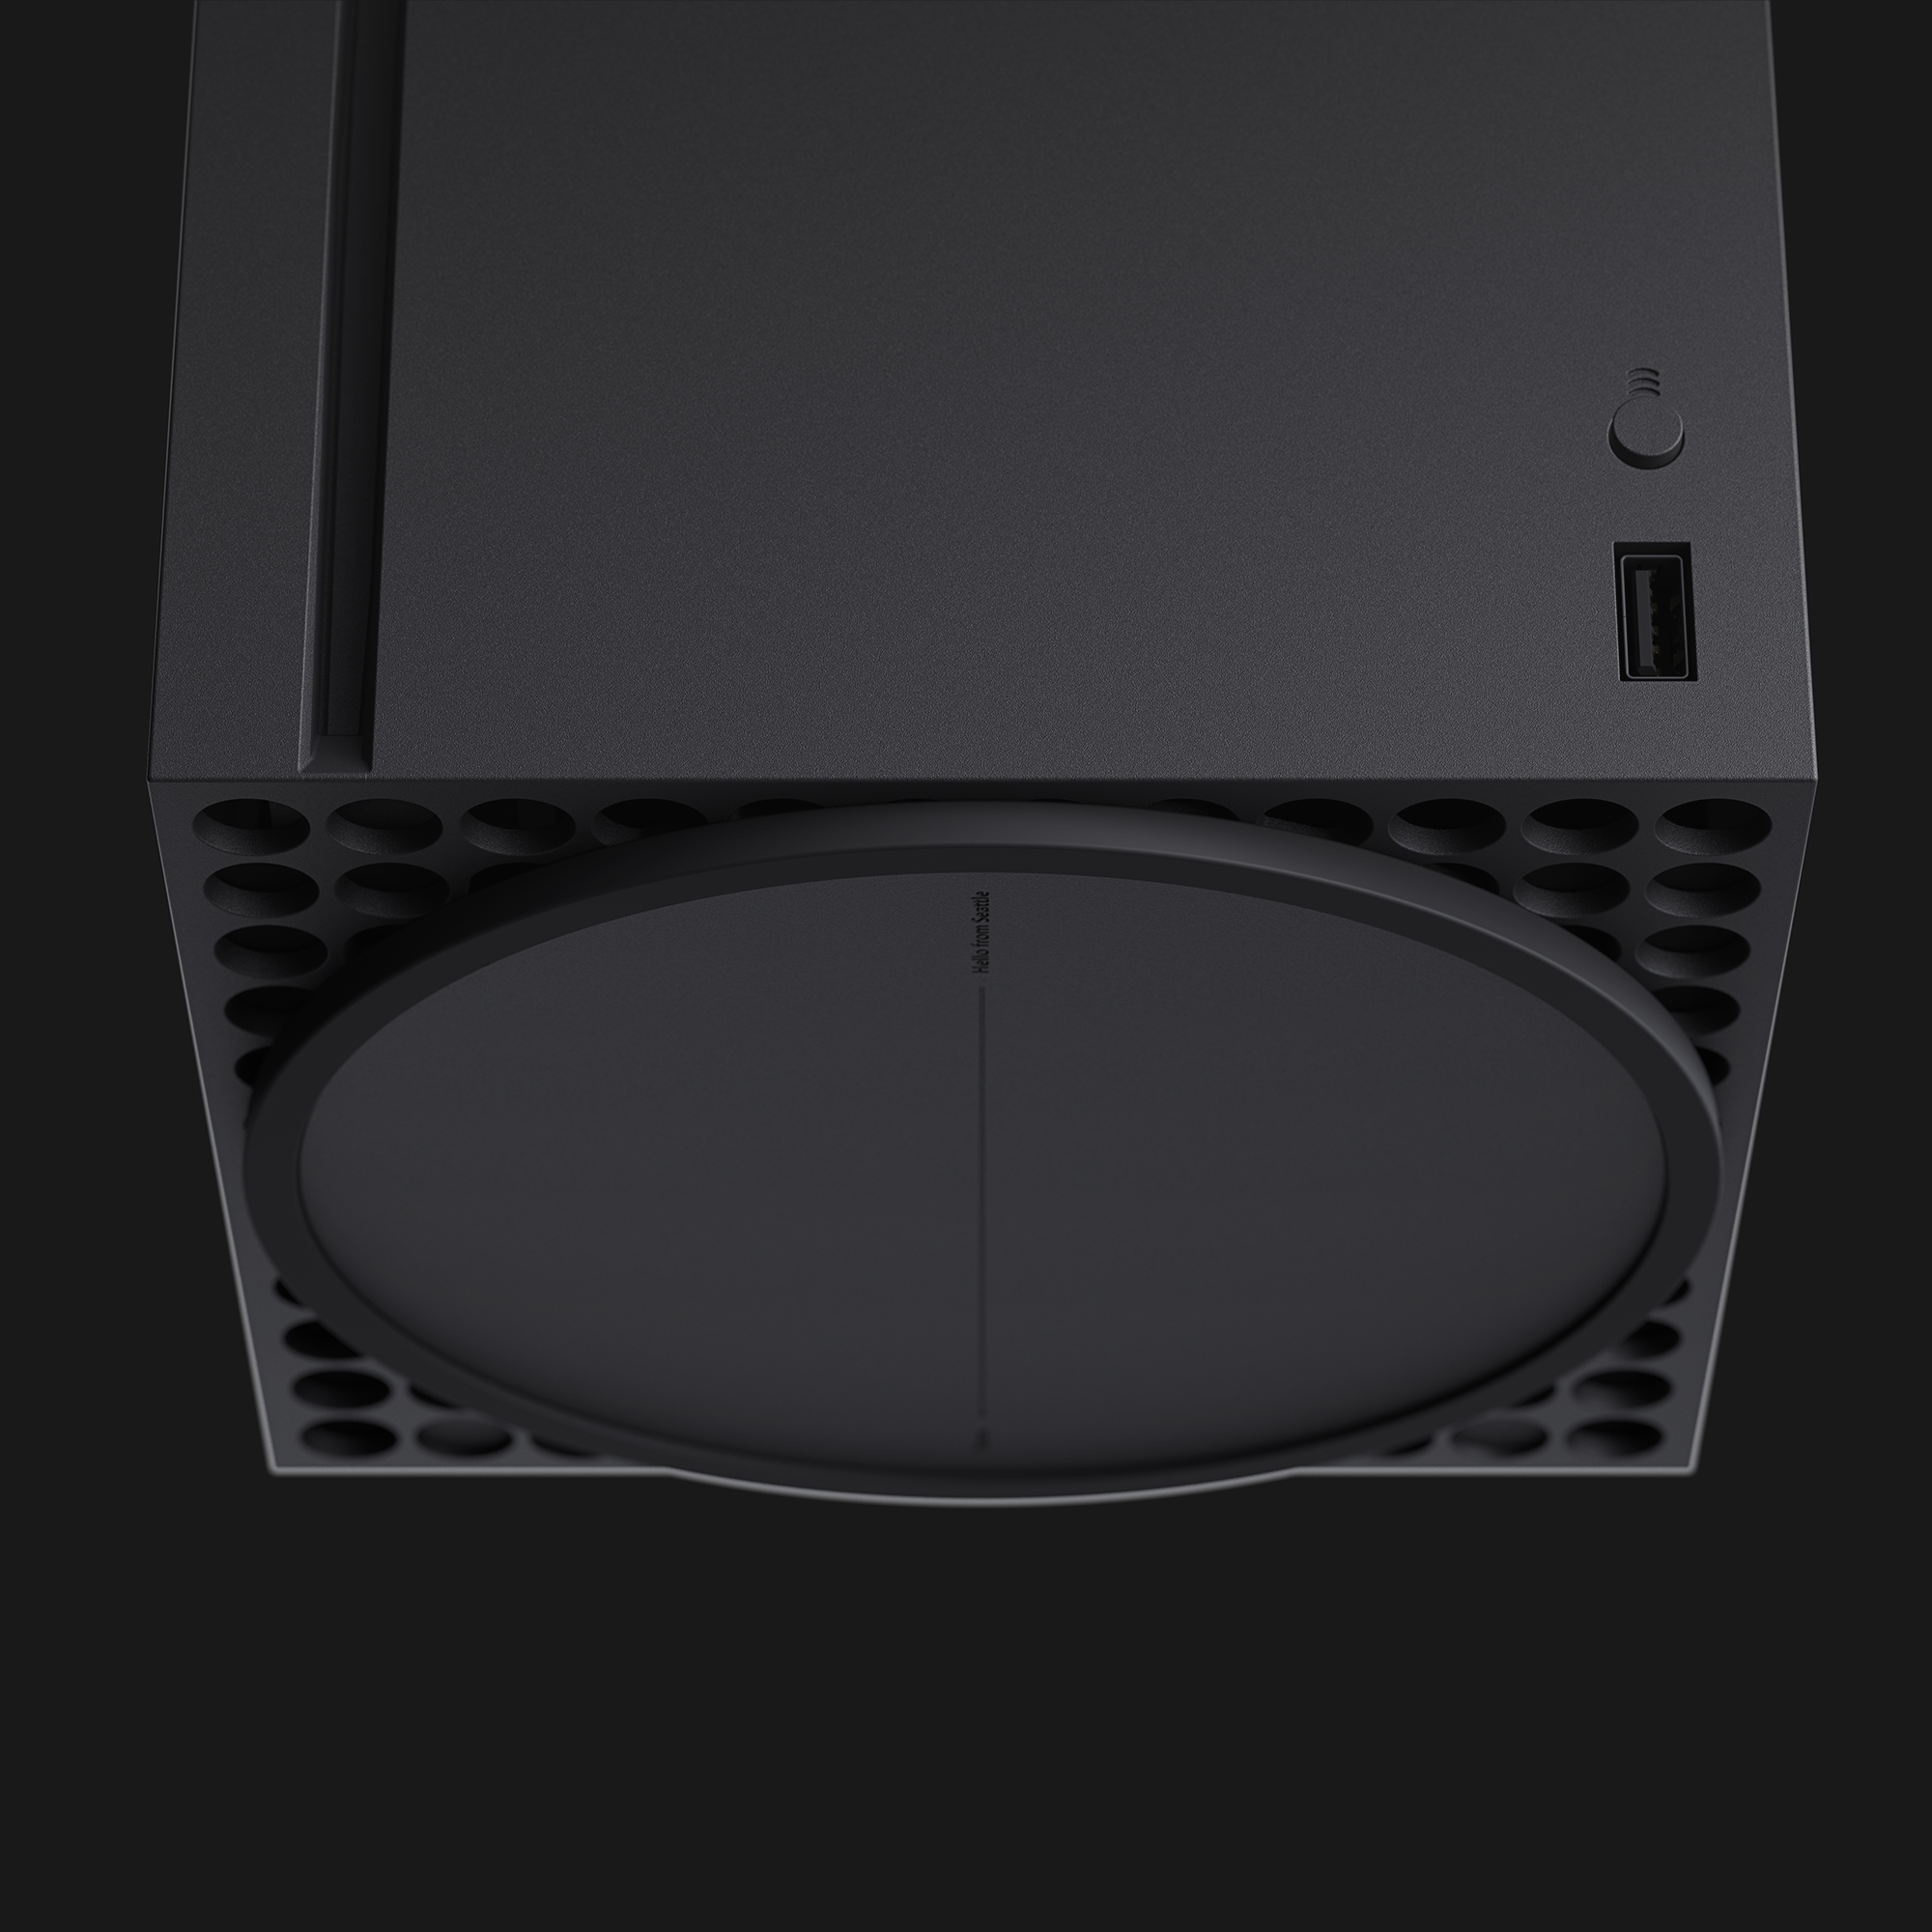 Xbox Series X Video Game Console, Black - image 5 of 7